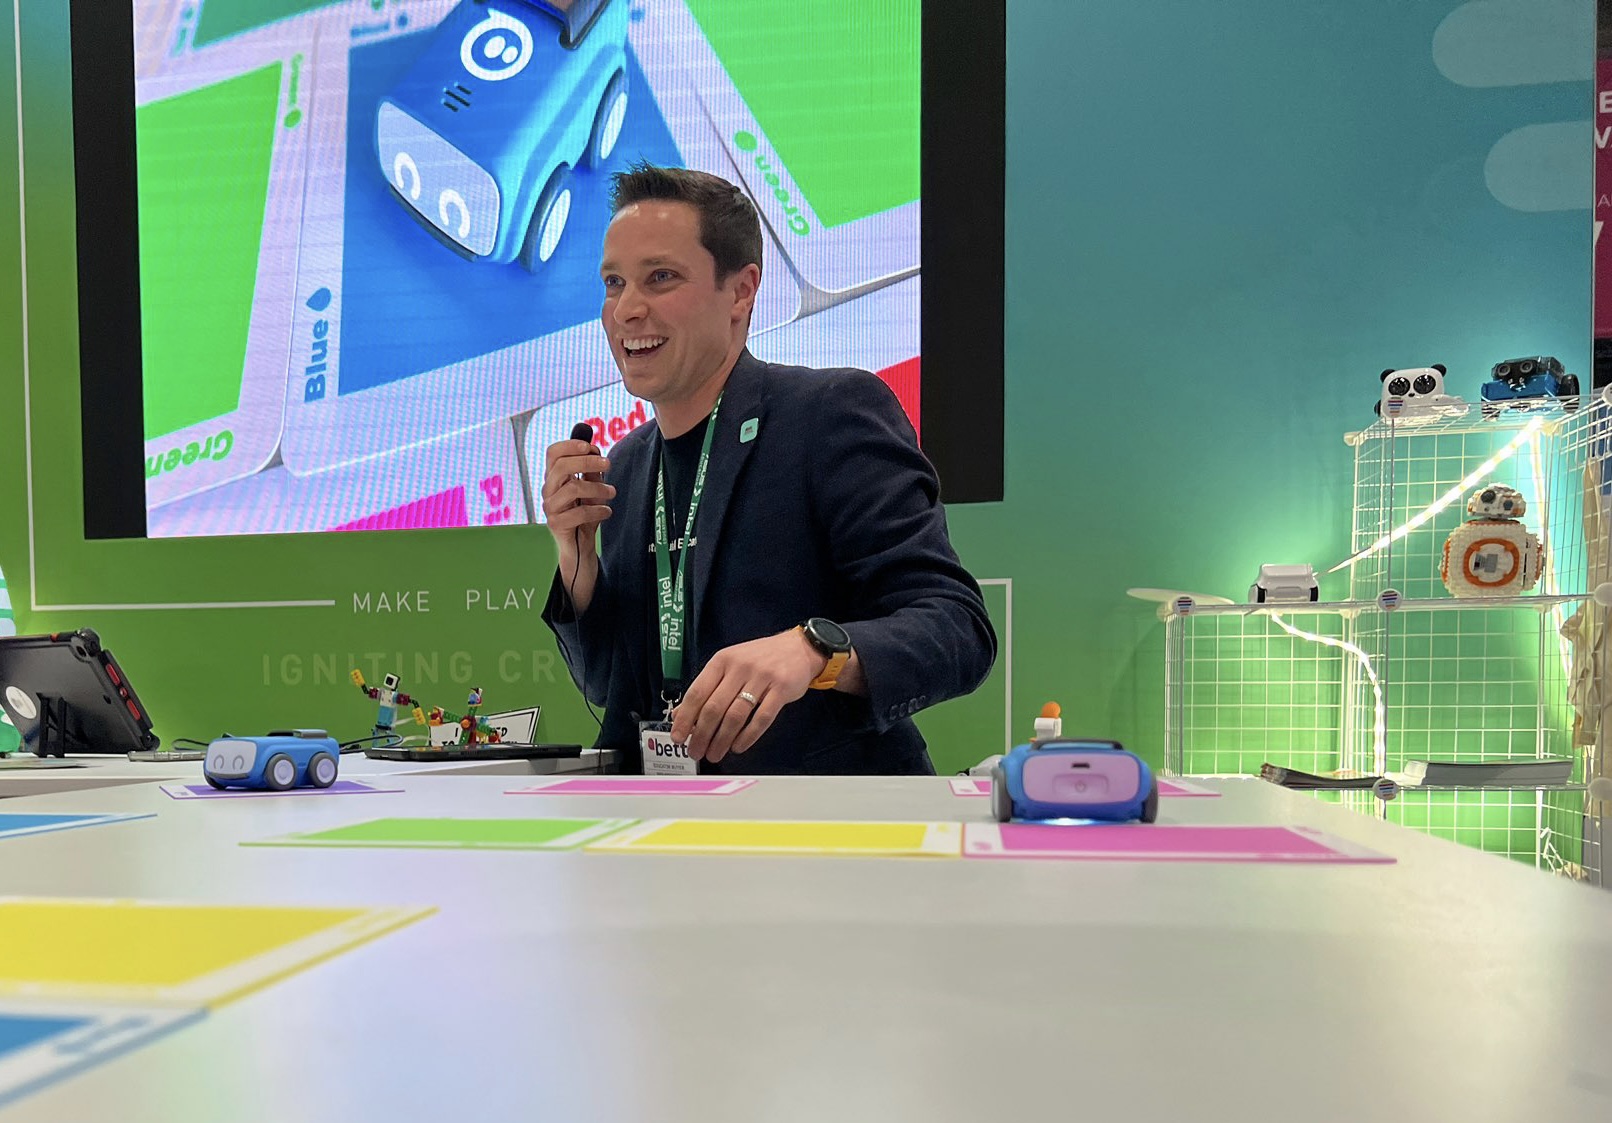 Mr Matt Warne was presenting and demonstrating outstanding teaching techniques on the Sphero stand